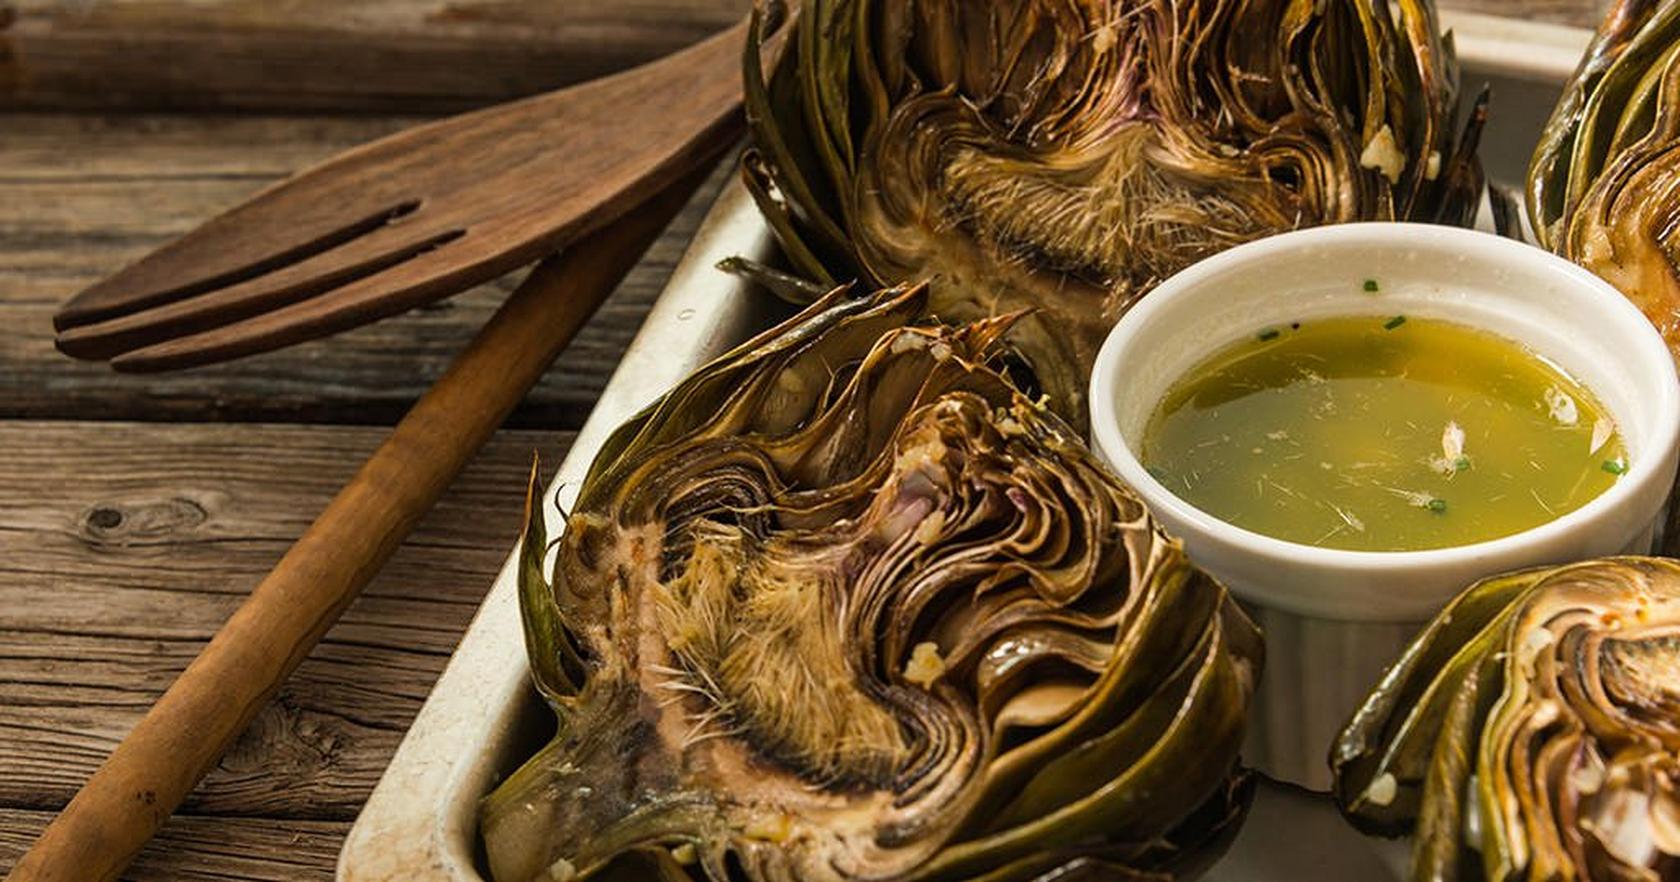 Roasted Artichokes With Garlic Butter